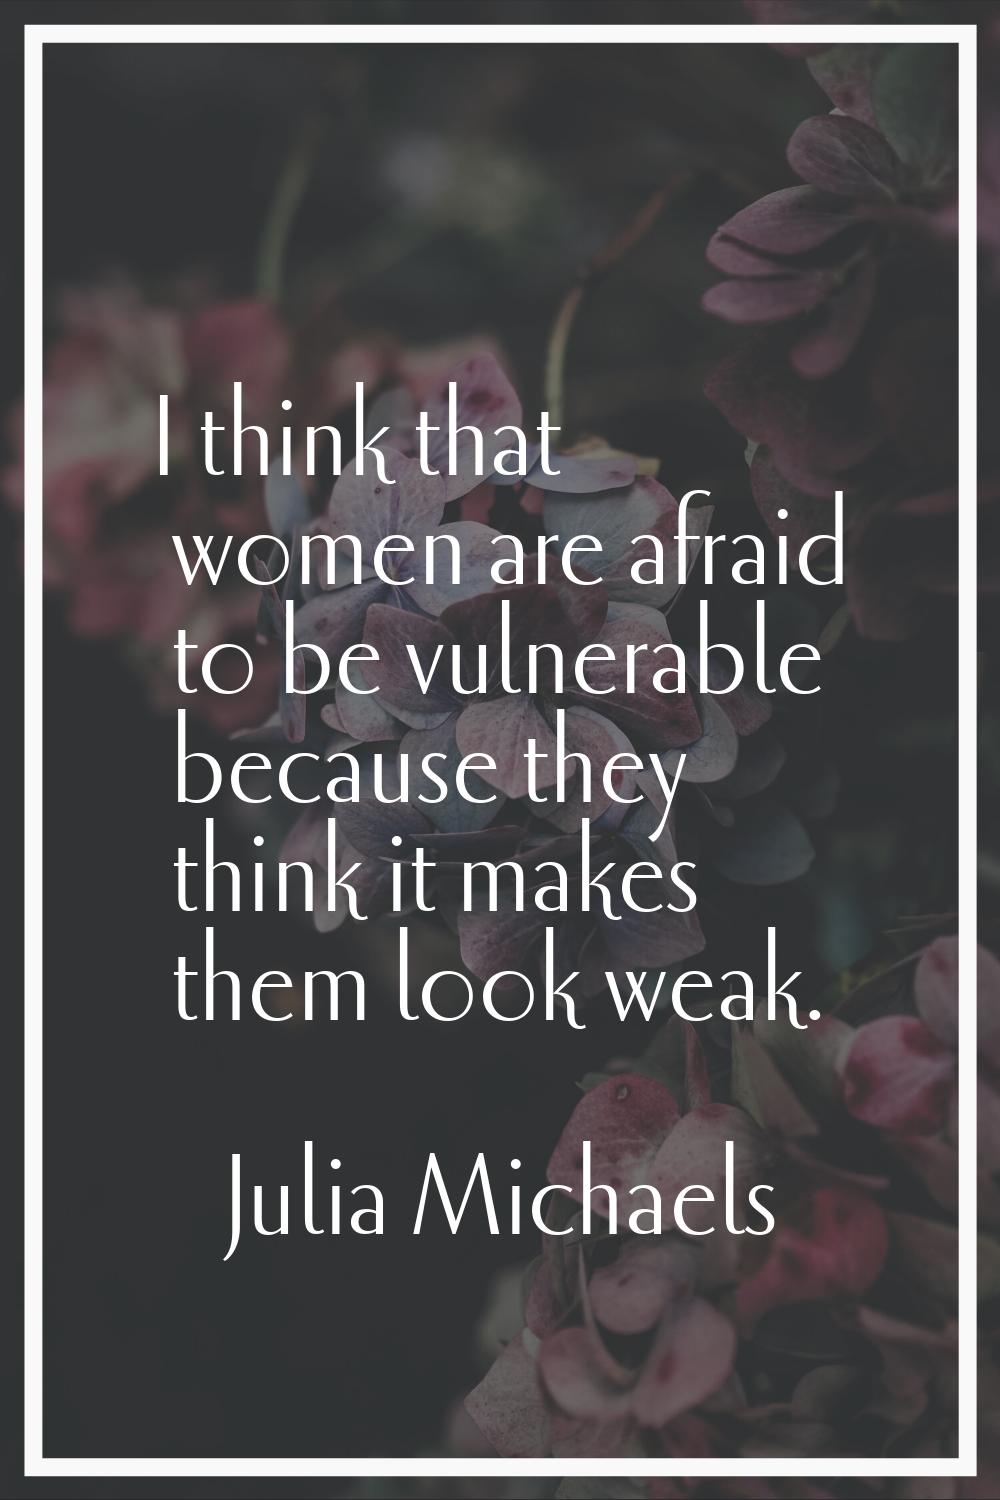 I think that women are afraid to be vulnerable because they think it makes them look weak.